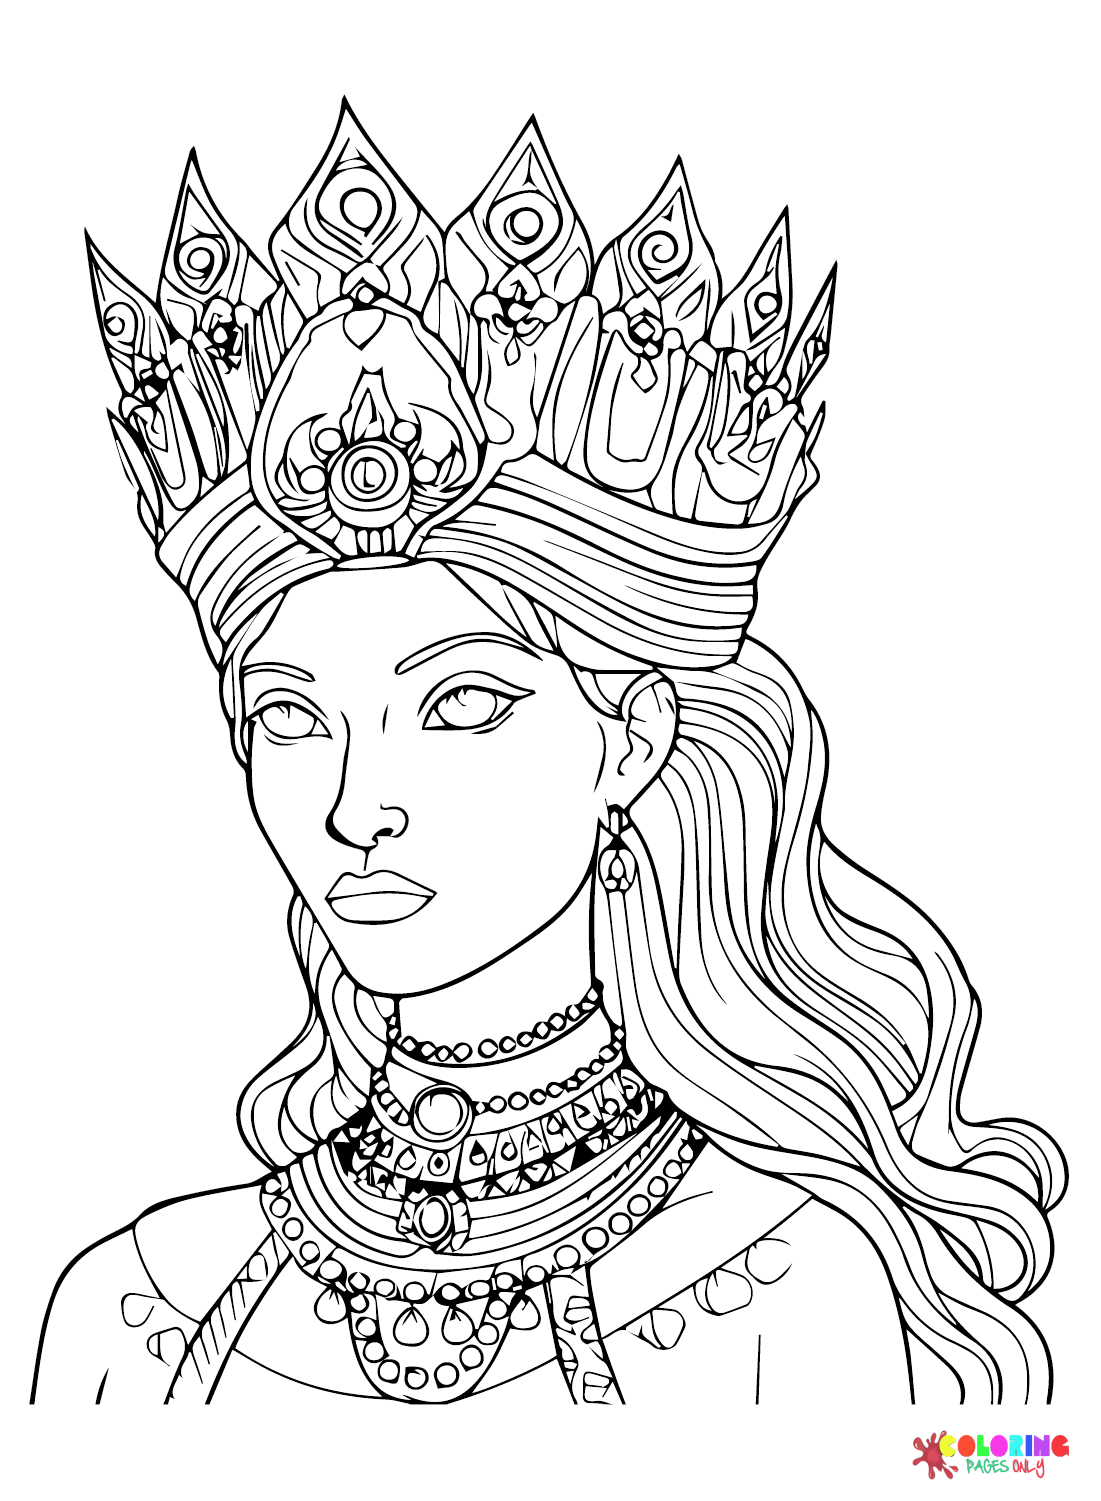 Queen color Sheets Coloring Page